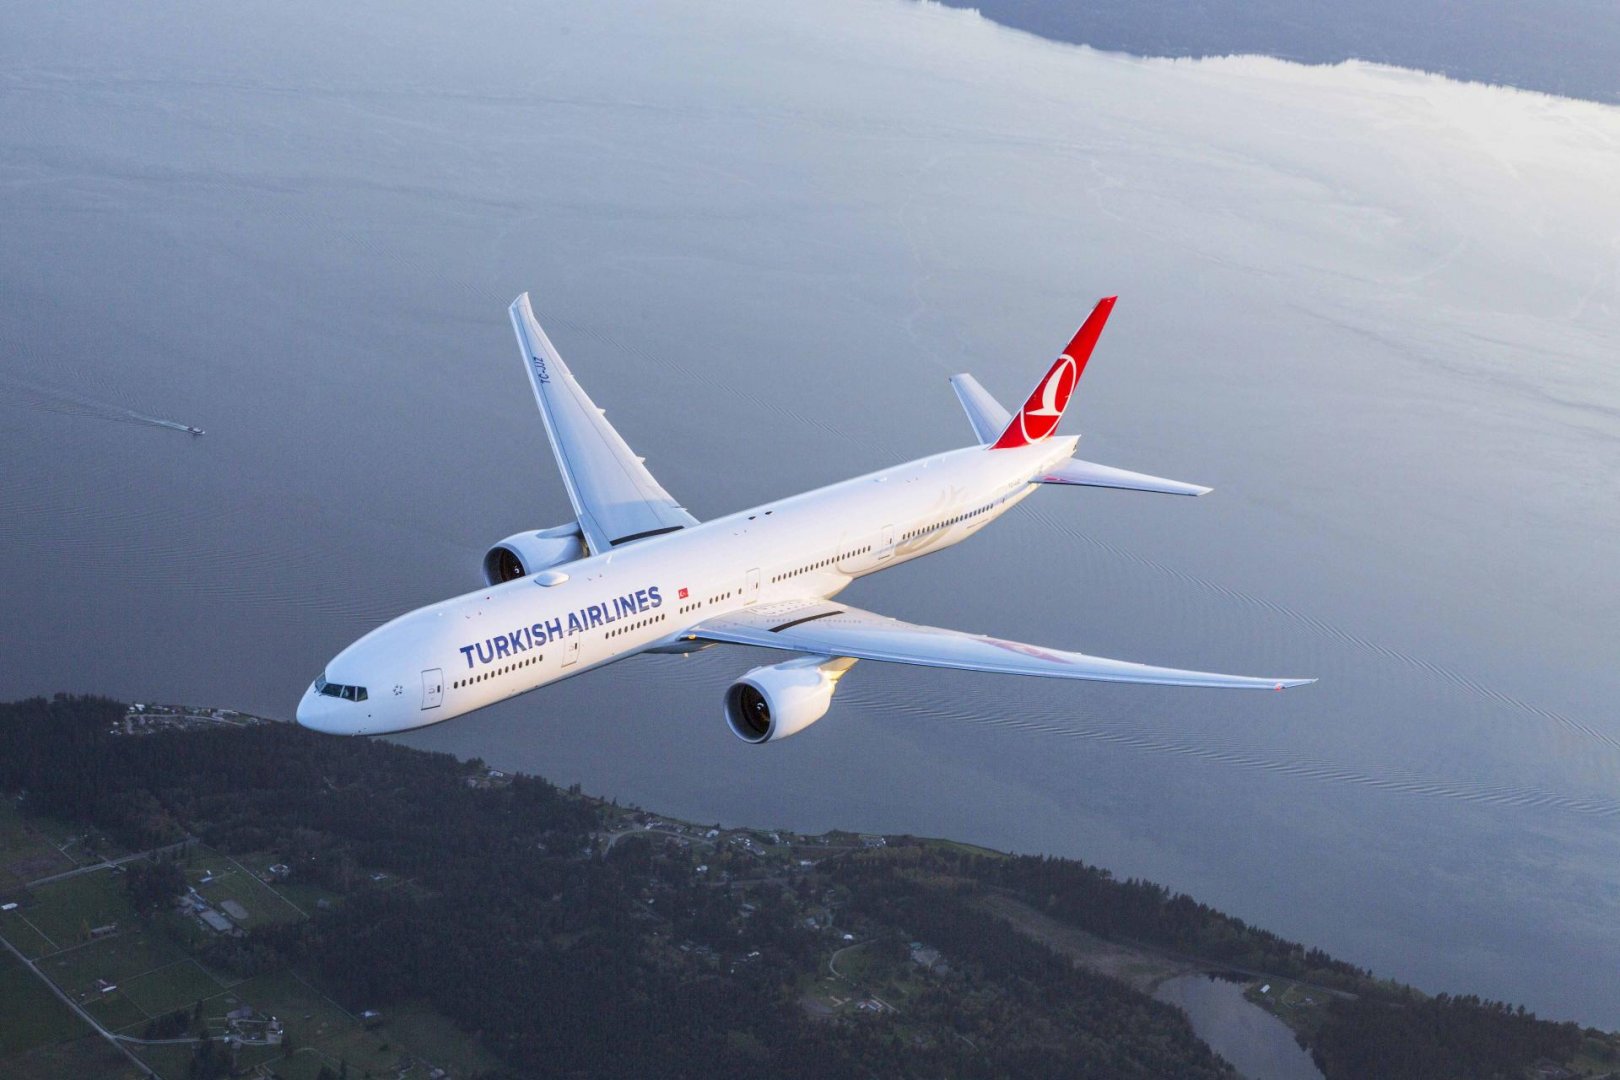 Turkish Airlines will operate special flight from Kazakhstan